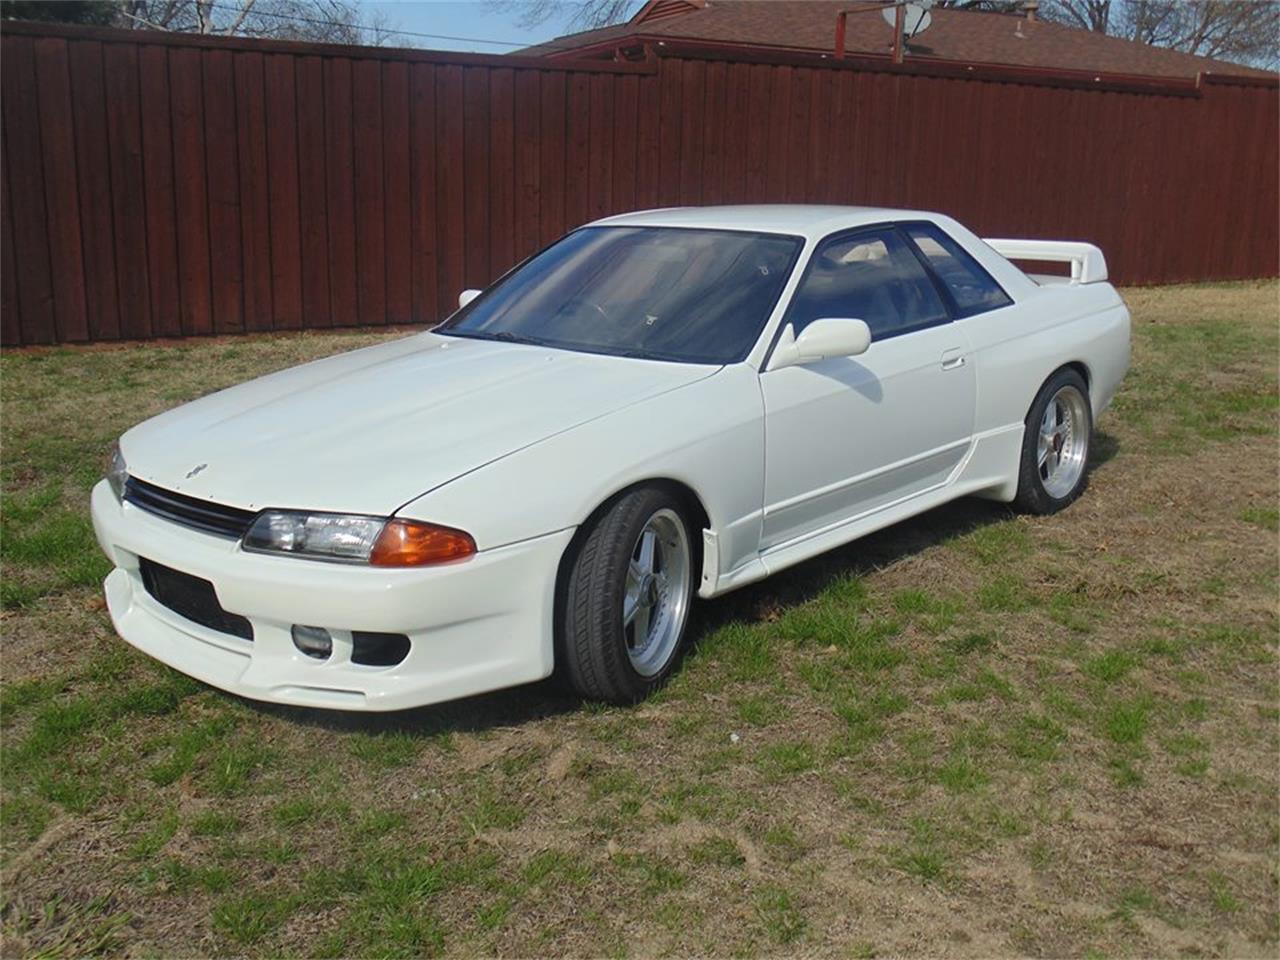 Perfect Nissan Nissan Skyline For Sale In Texas